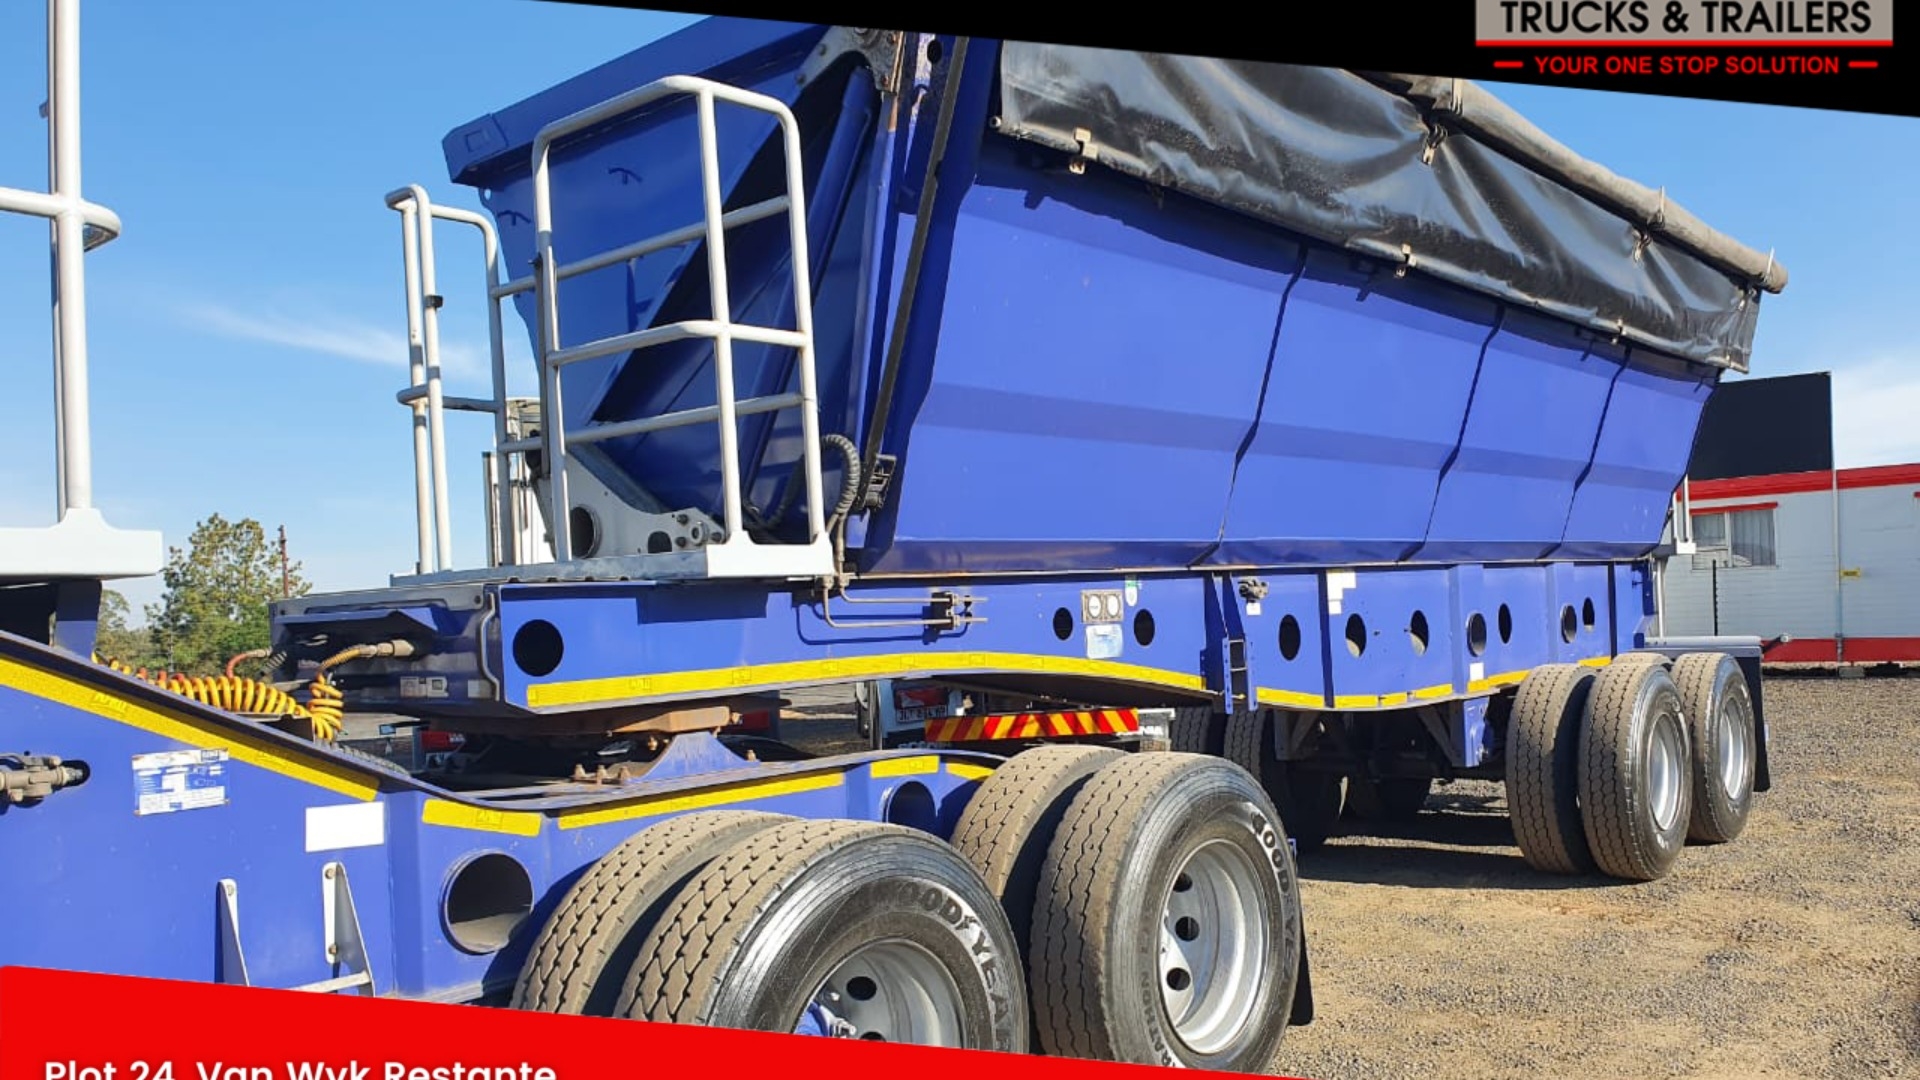 Afrit Trailers Side tipper AFRIT 45 CUBE SIDE TIPPERS 2017 for sale by ZA Trucks and Trailers Sales | Truck & Trailer Marketplaces